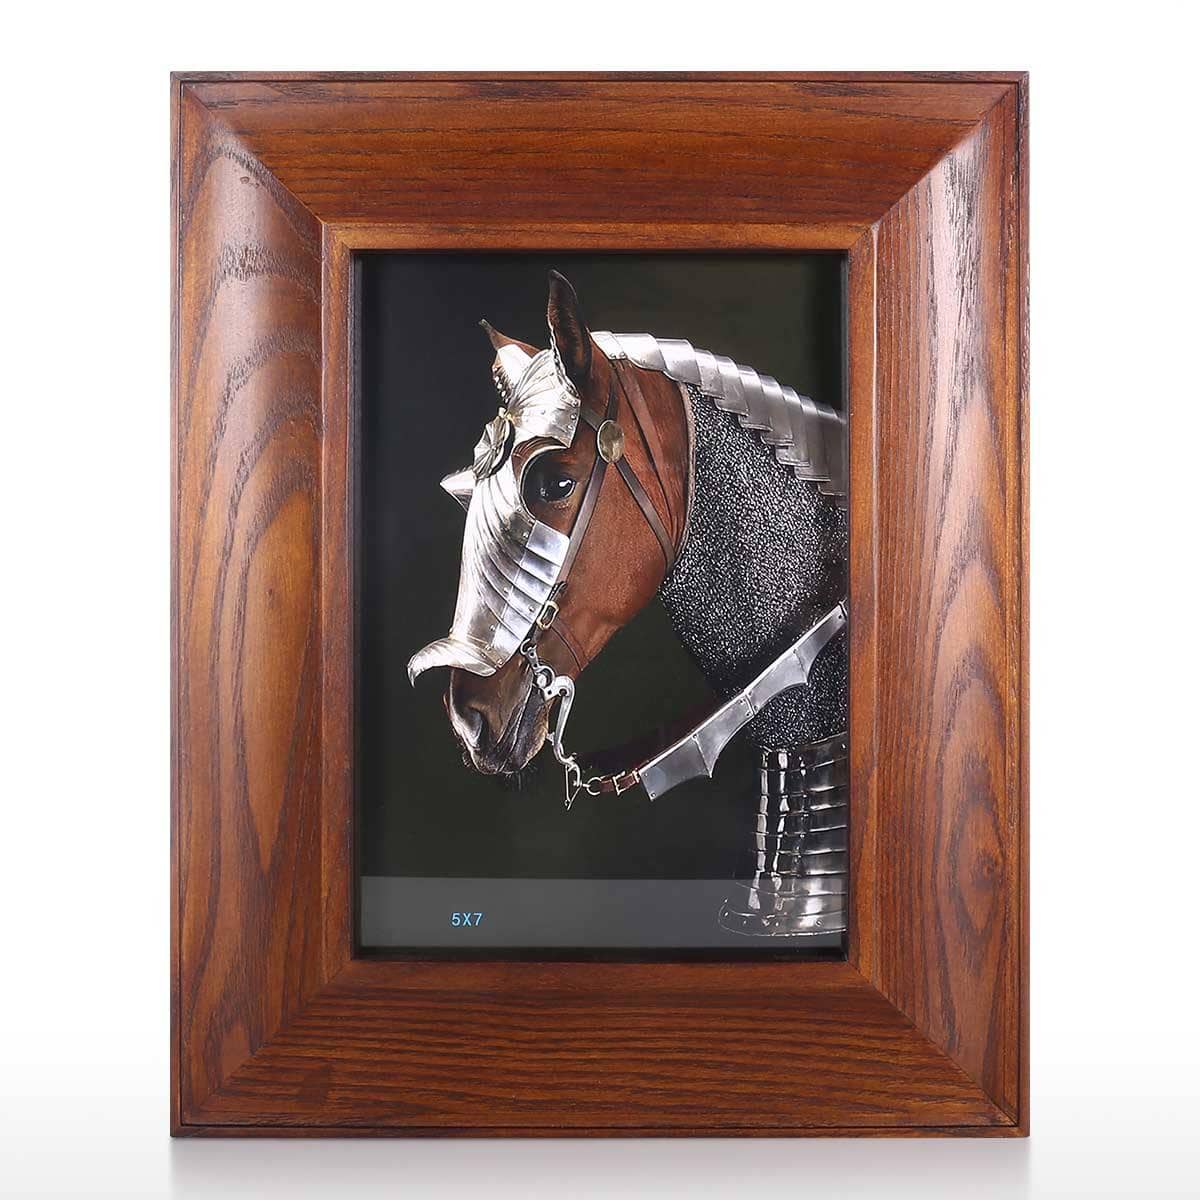 Handcrafted Wood Picture Frame - Rustic & Personalized Home Decor